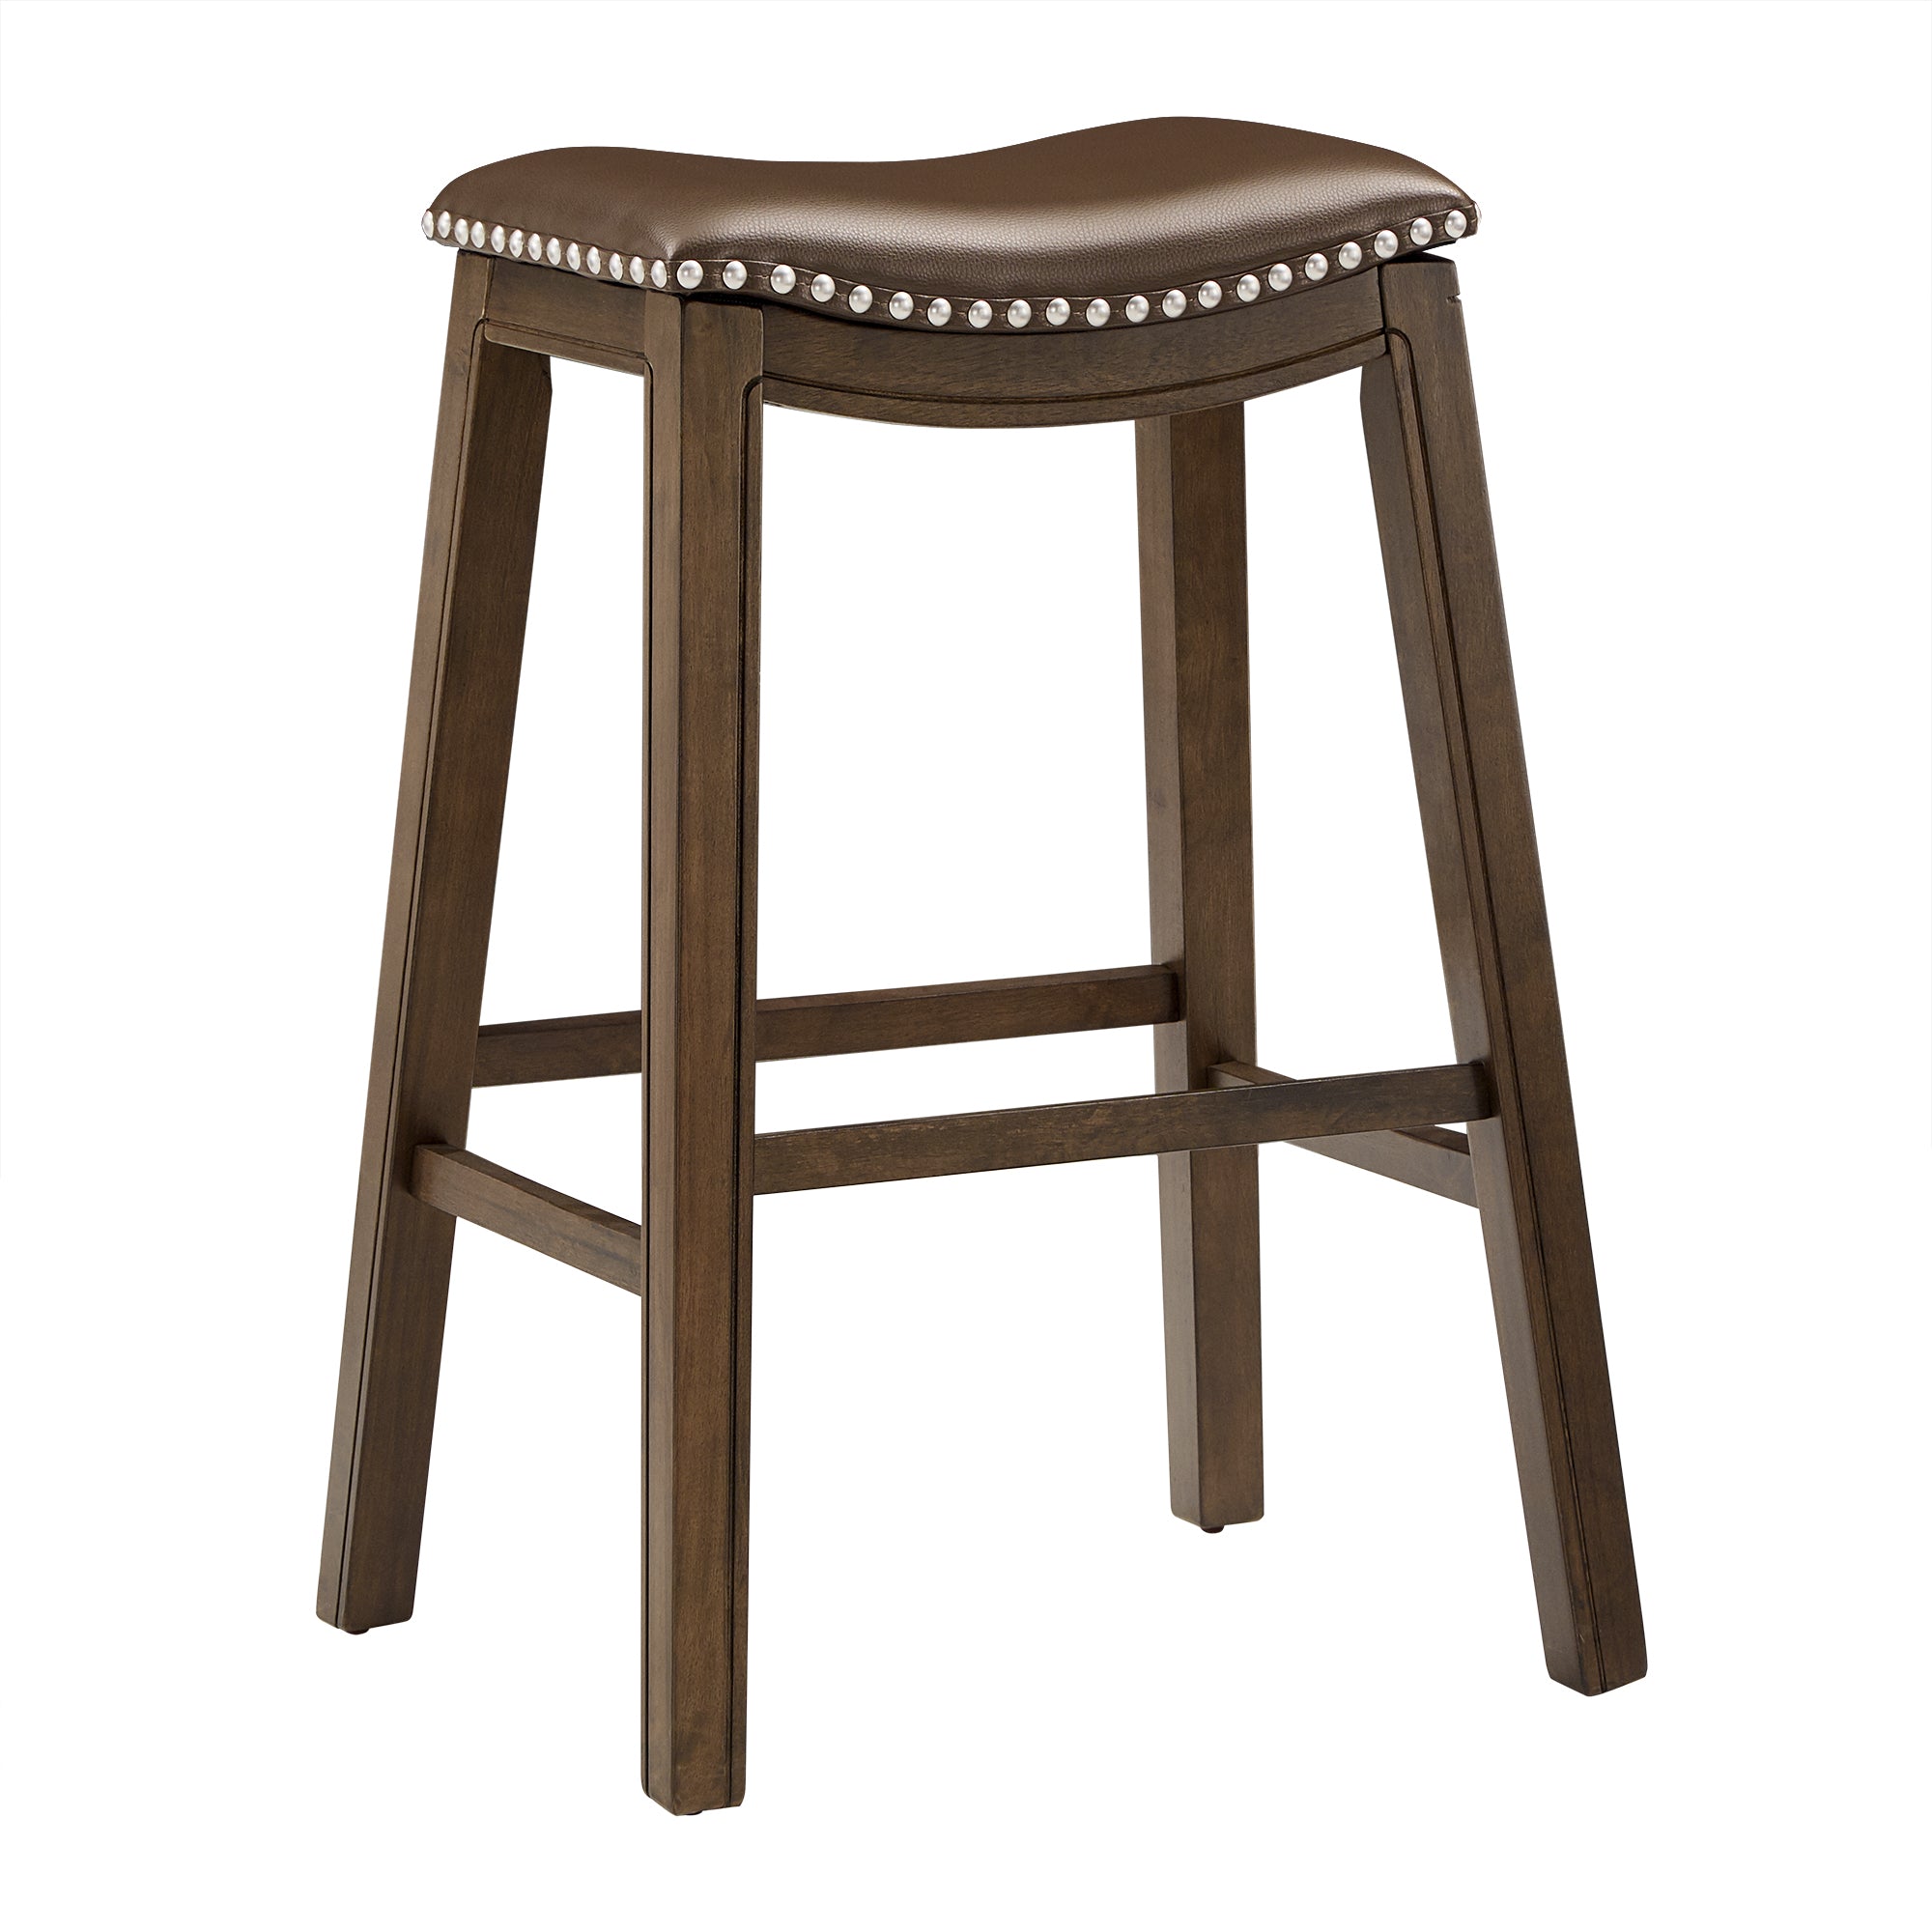 Faux Leather Saddle Seat Backless Stool - Brown Faux Leather, Bar